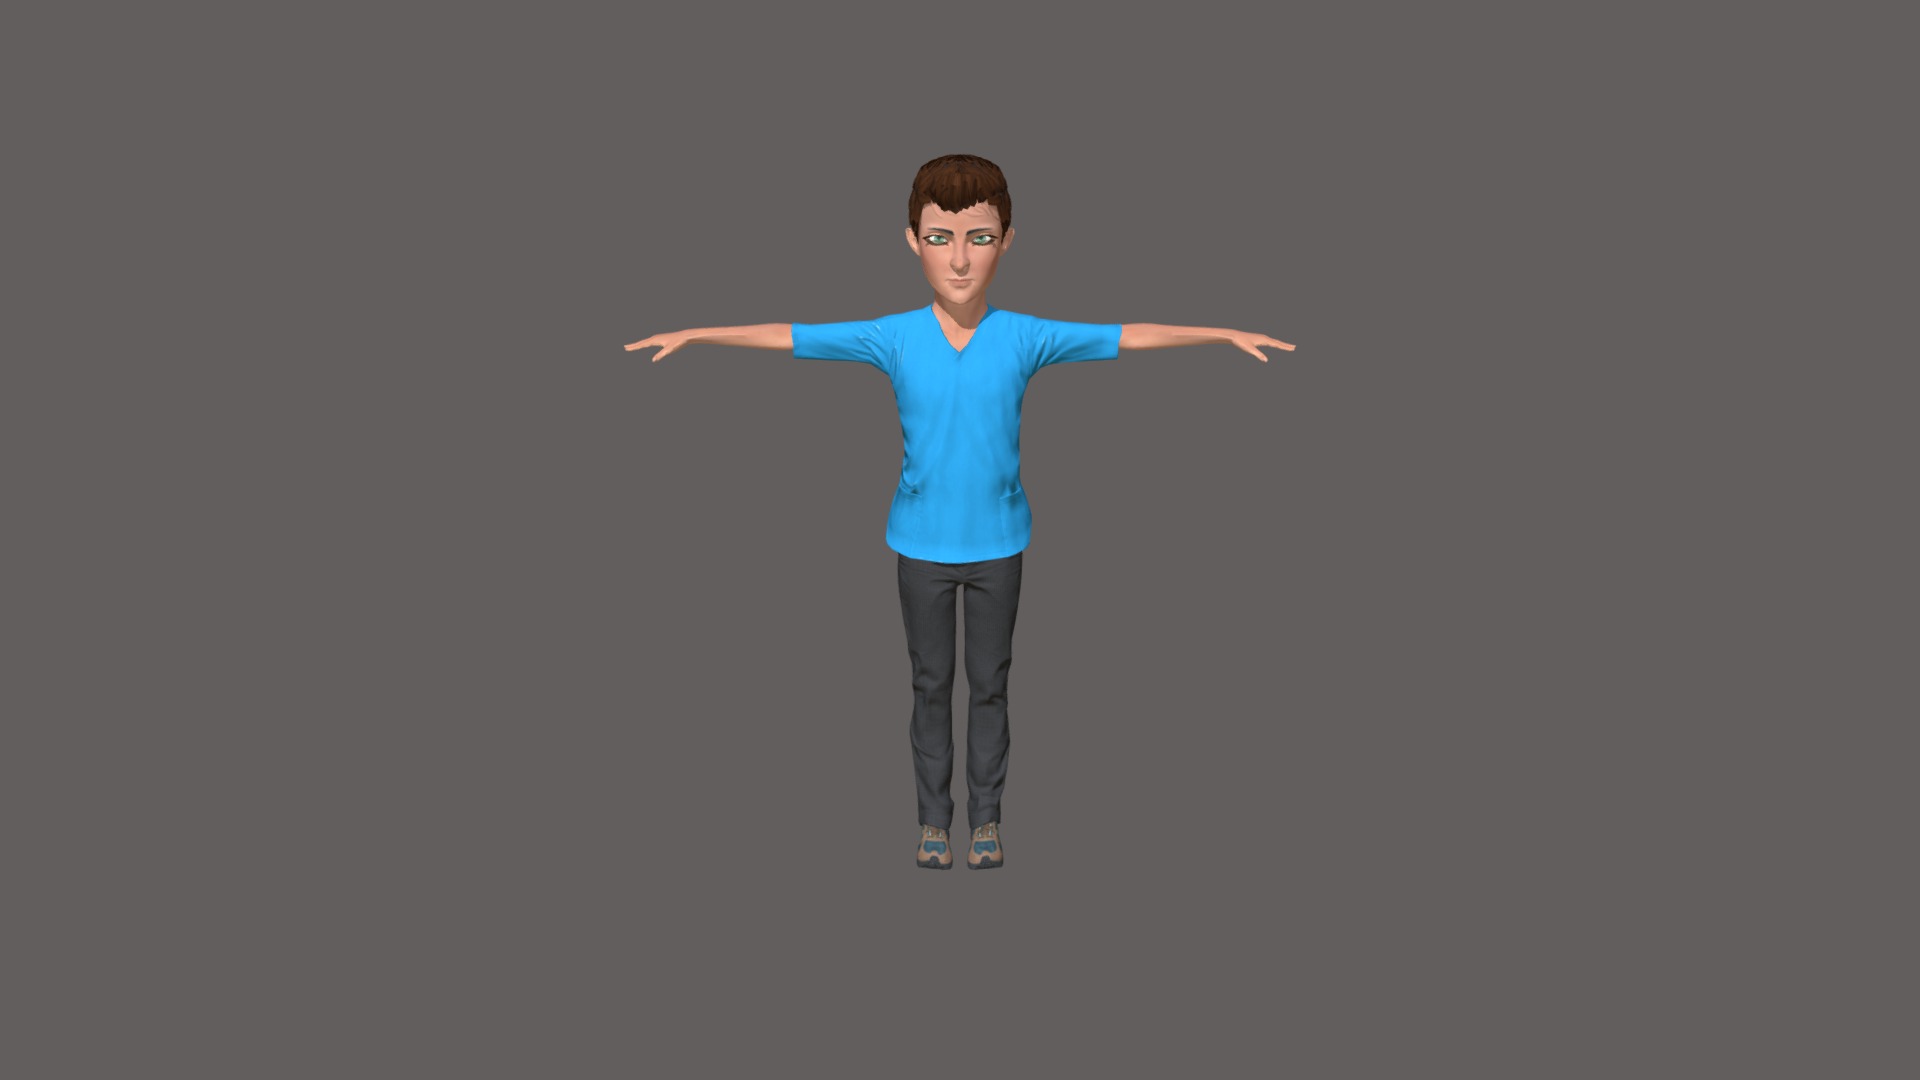 3D model Sky - This is a 3D model of the Sky. The 3D model is about a person standing on a circular object.